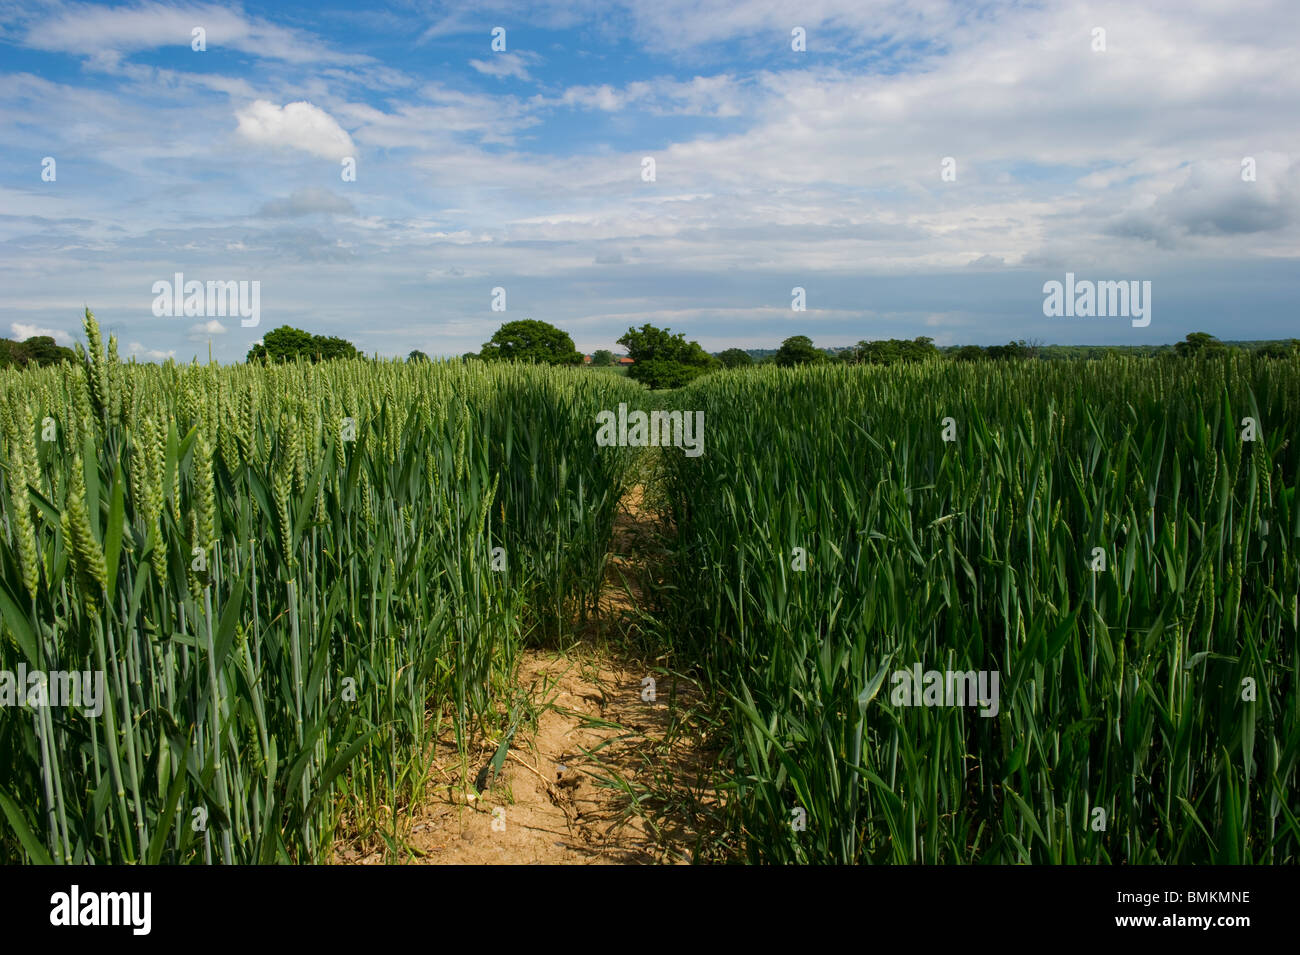 Arable land being used to grow wheat crops in Billericay Essex UK. Stock Photo